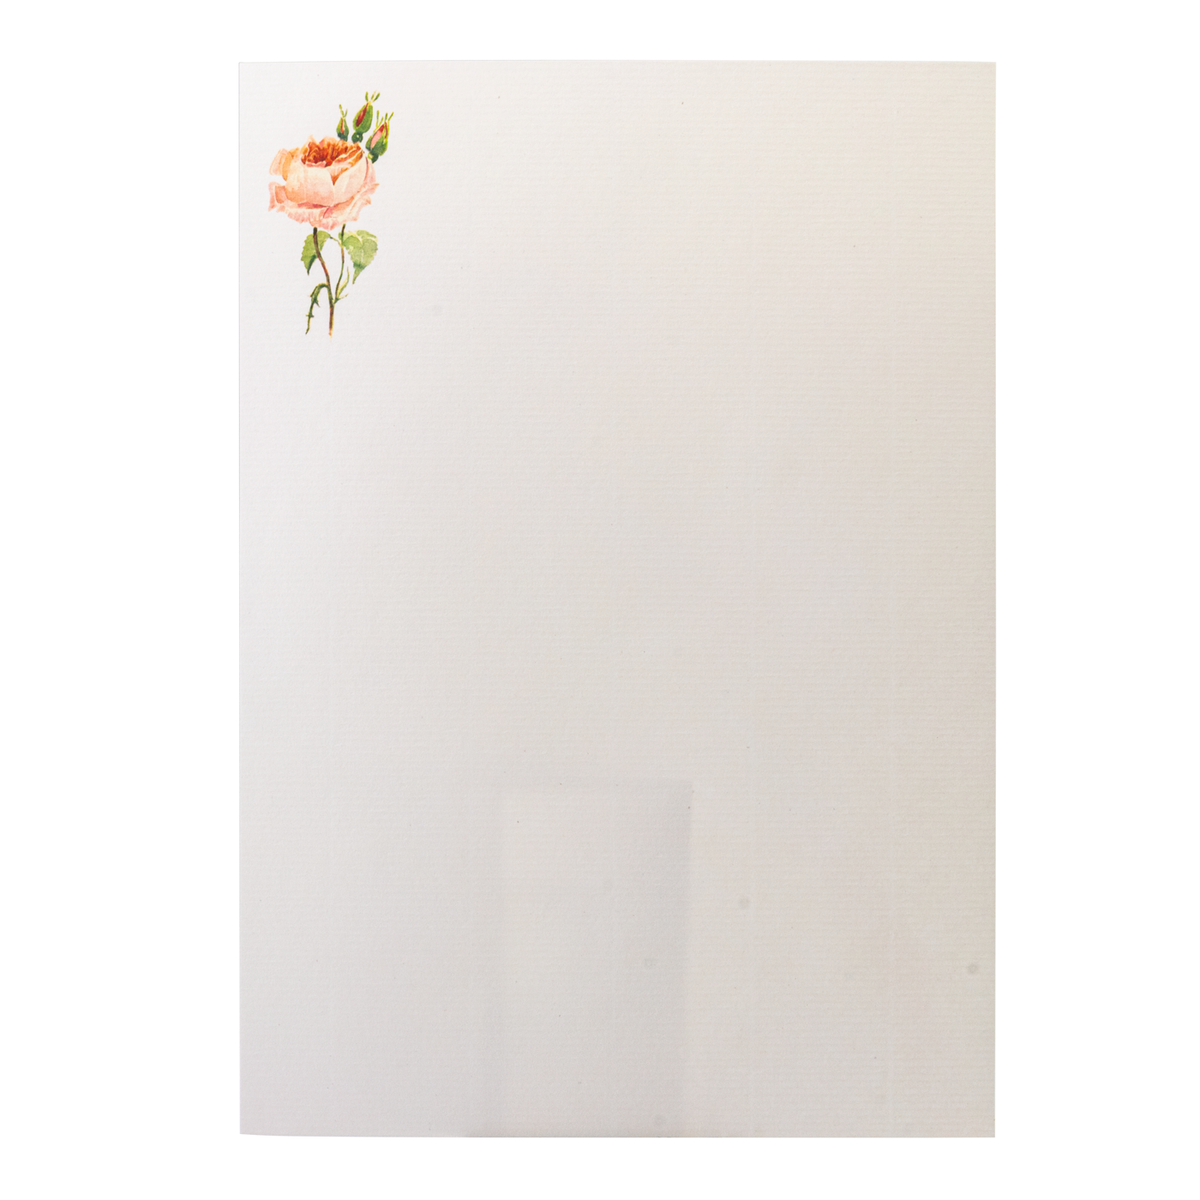 G. Lalo " Secrets of the Rose" Correspondence Sheets with Envelopes